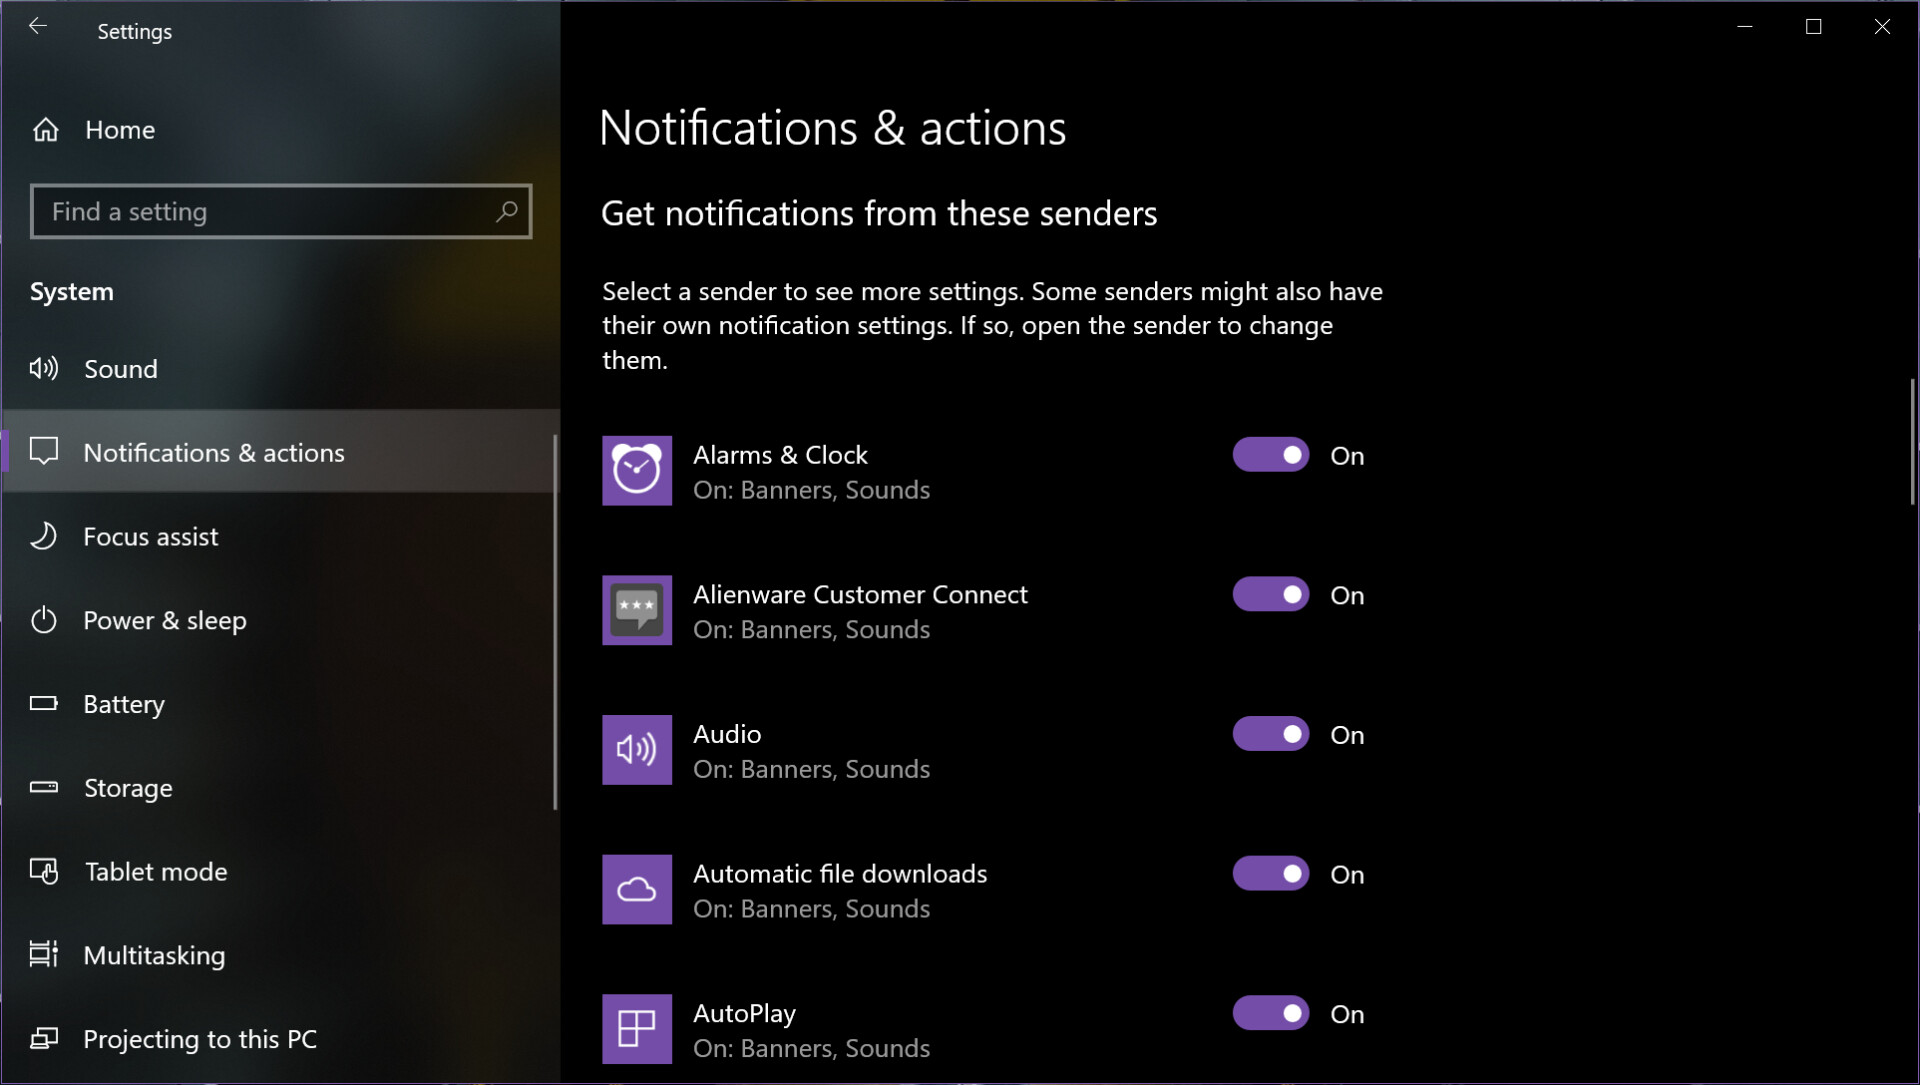 Windows 10 get notifications from senders - How to use notifications in Windows 10